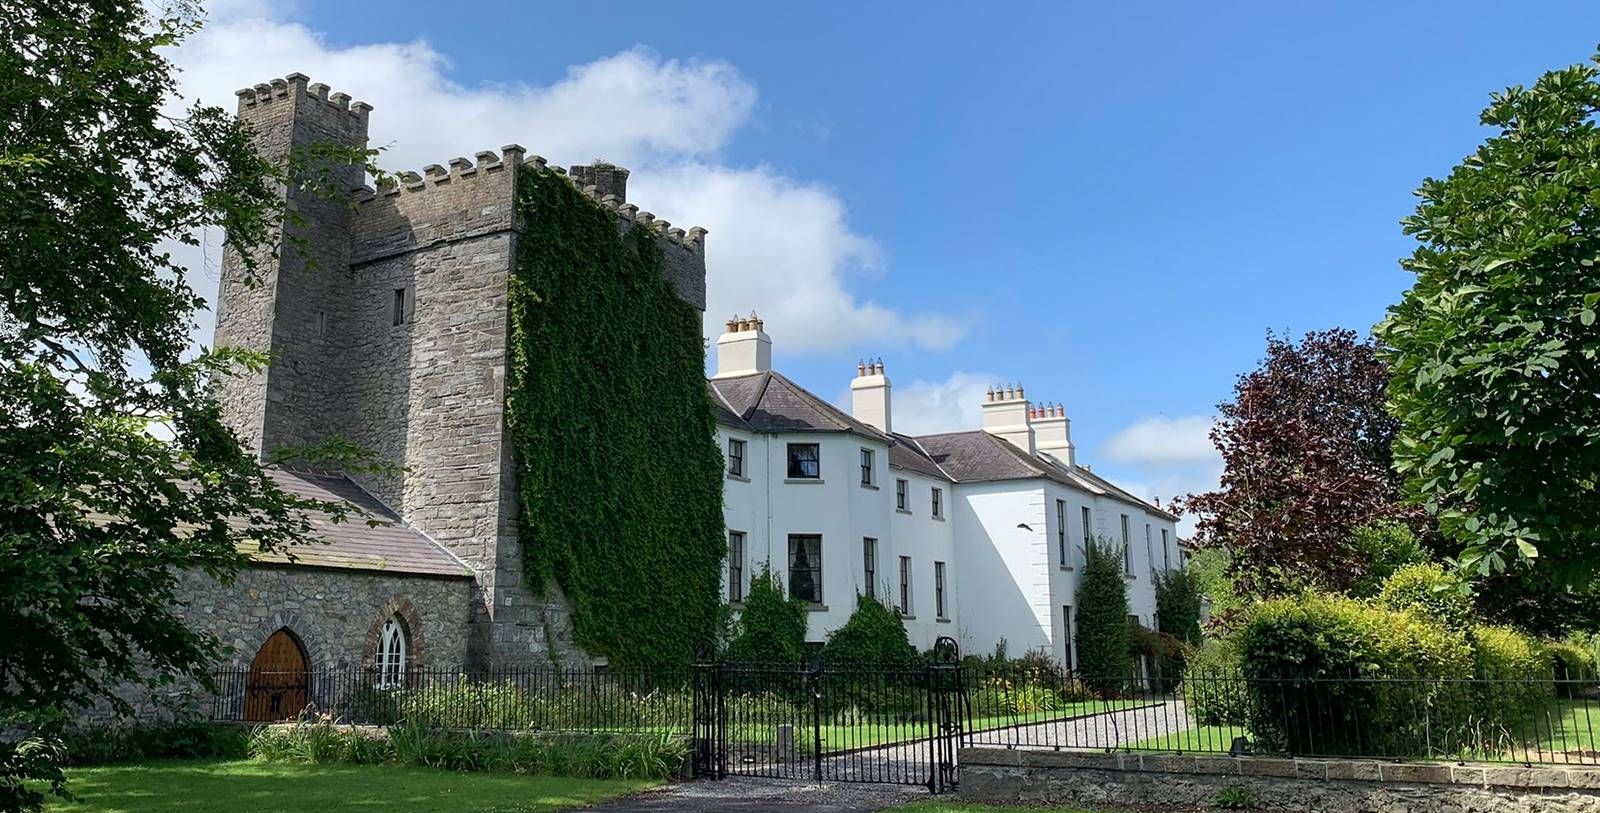 Image of hotel exterior Barberstown Castle, 1288, Member of Historic Hotels Worldwide, in Straffan, Ireland, Overview Video